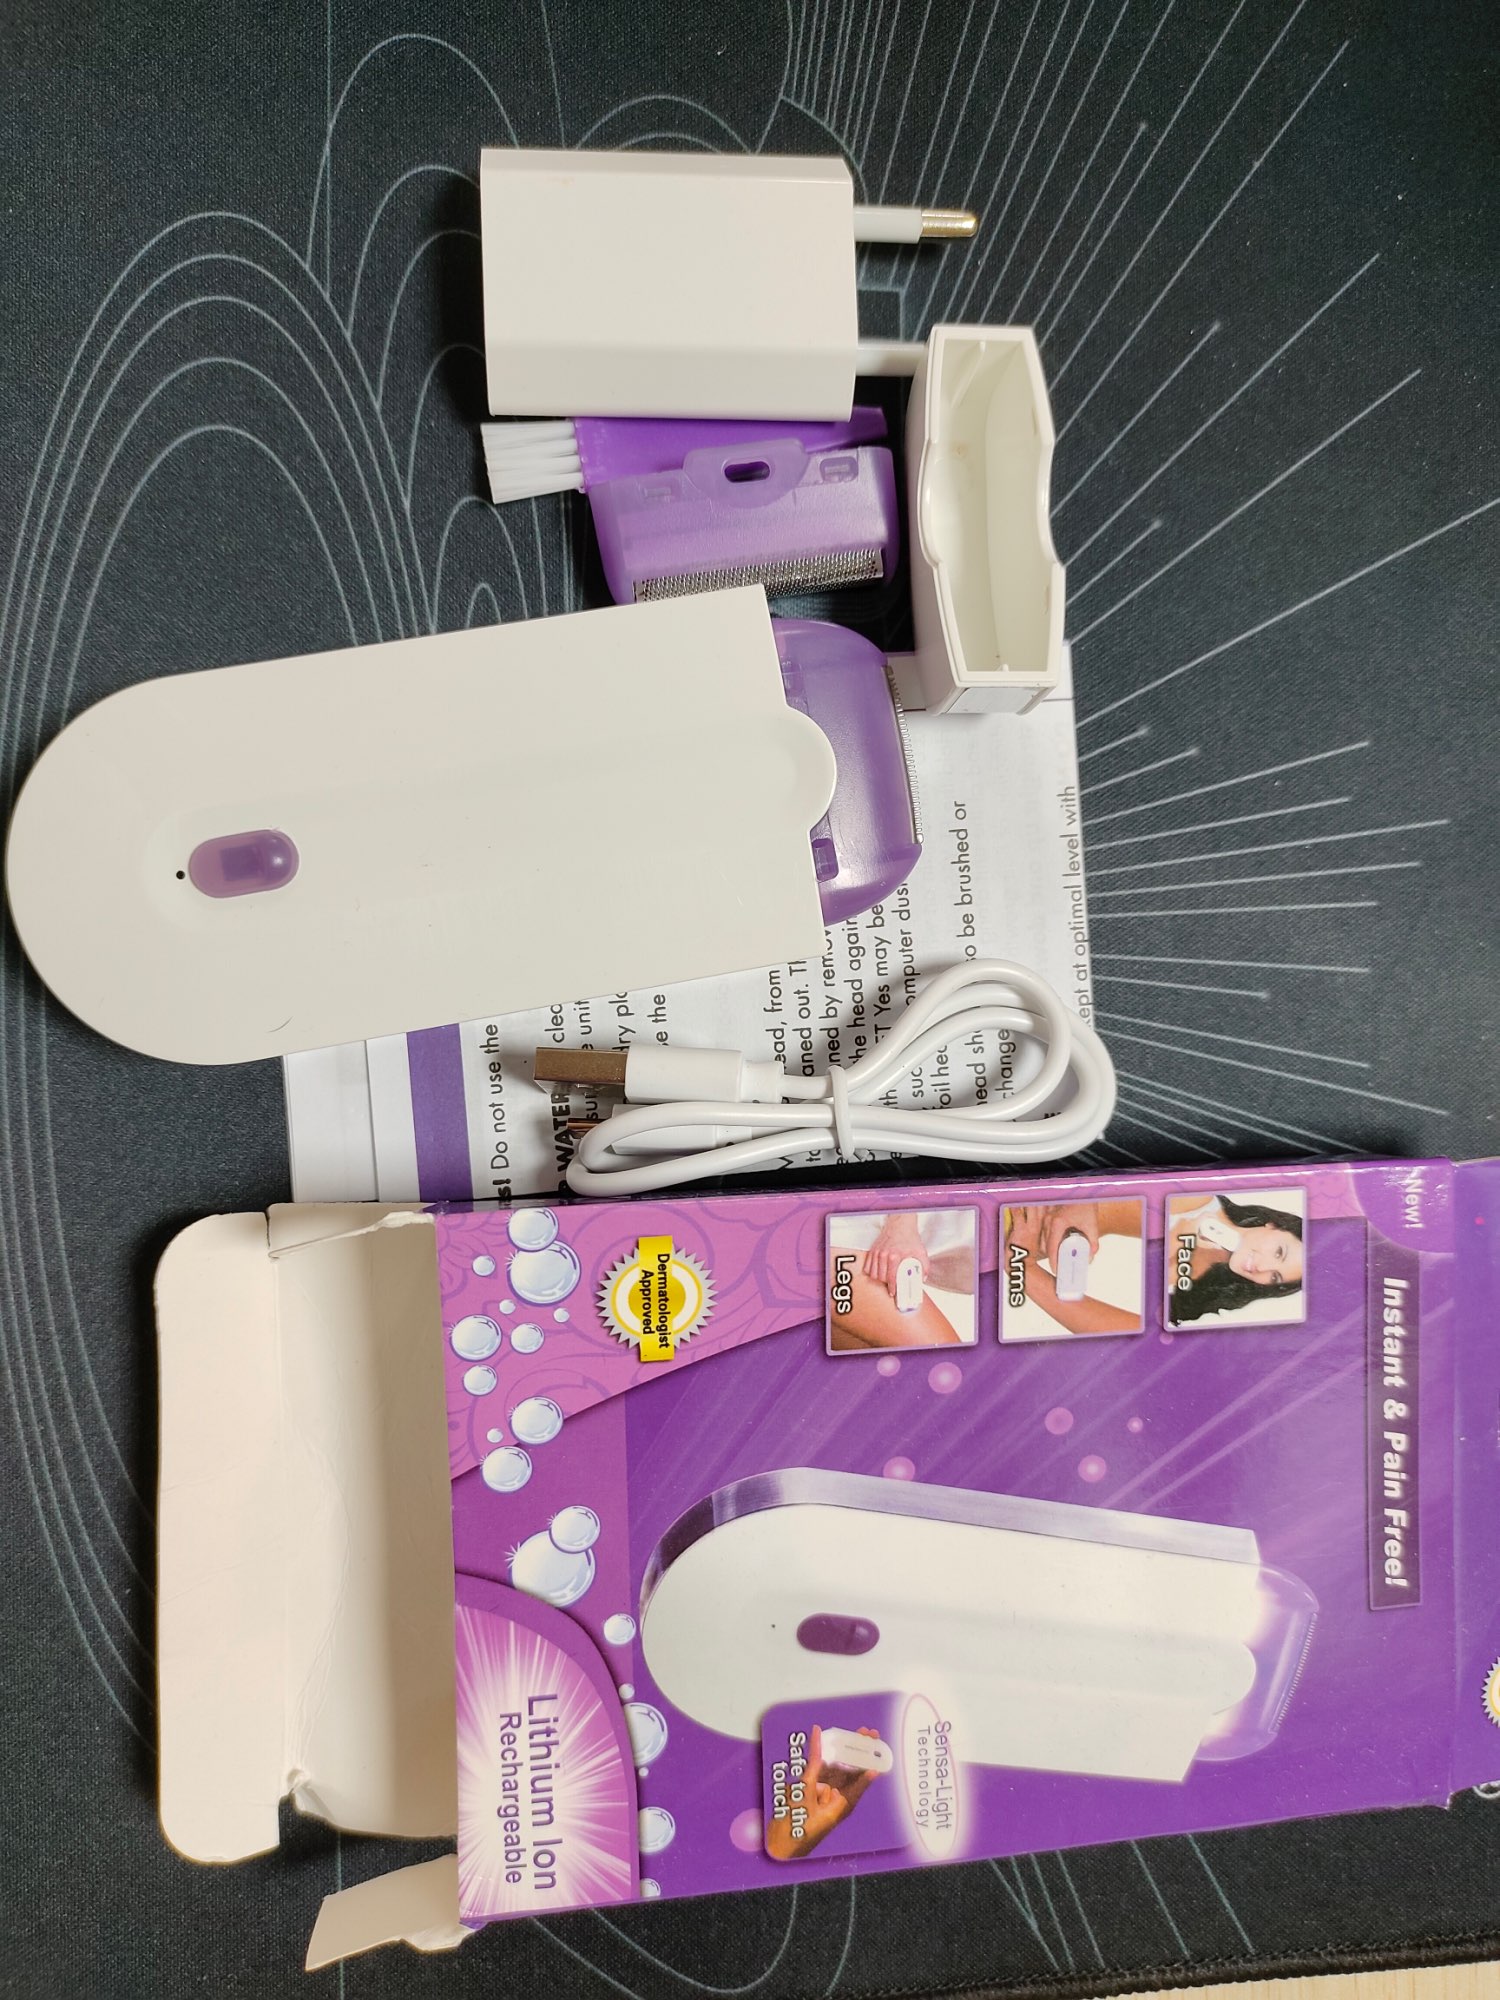 Finishing Touch Hair Remover Painless Epilator With Micro